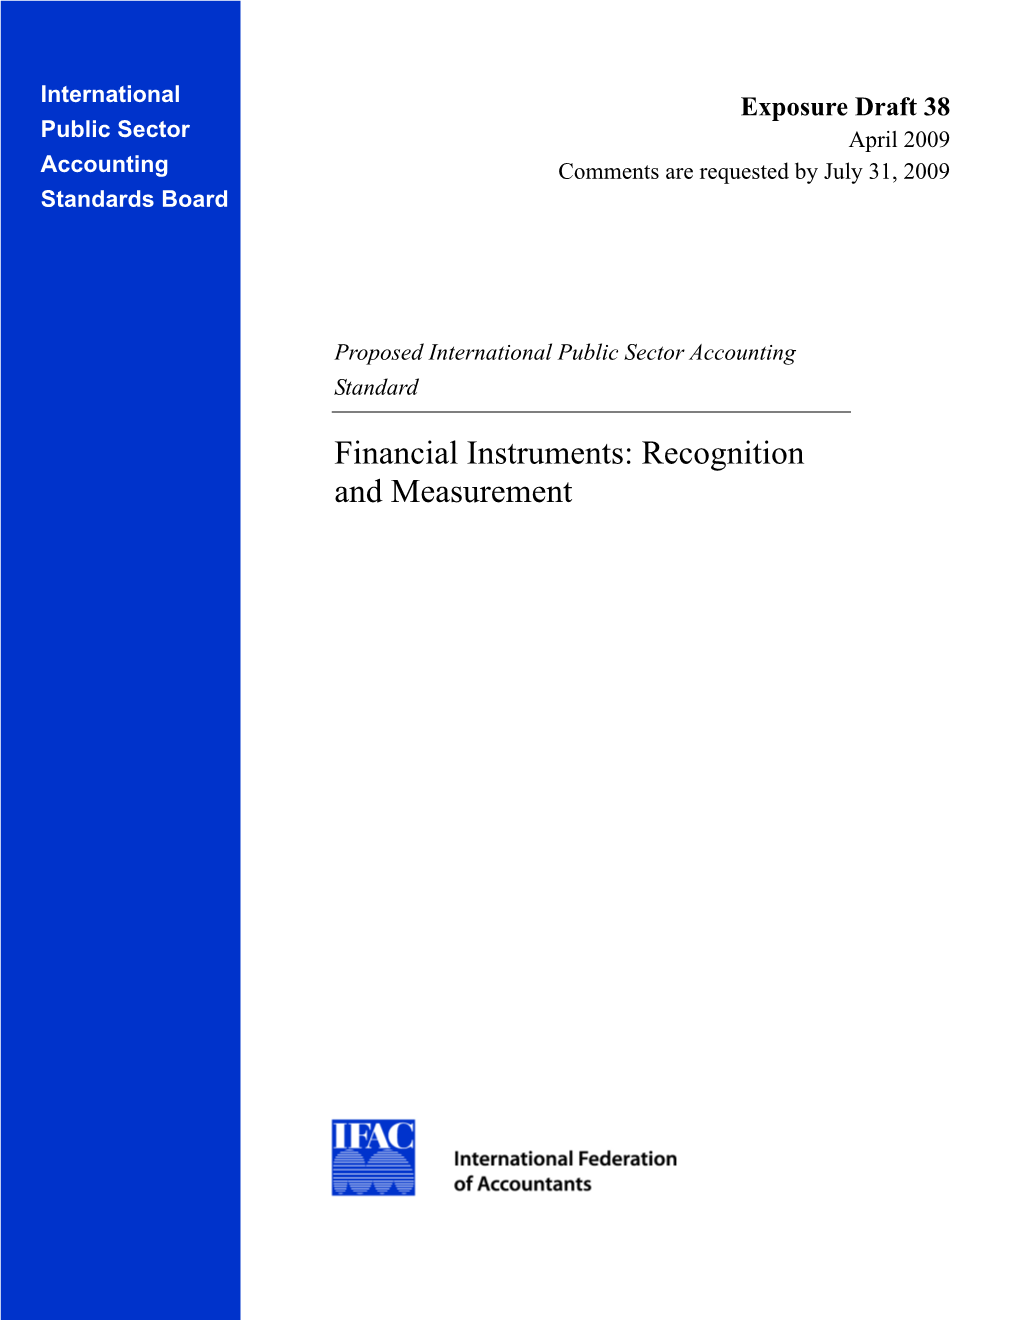 Financial Instruments: Recognition and Measurement